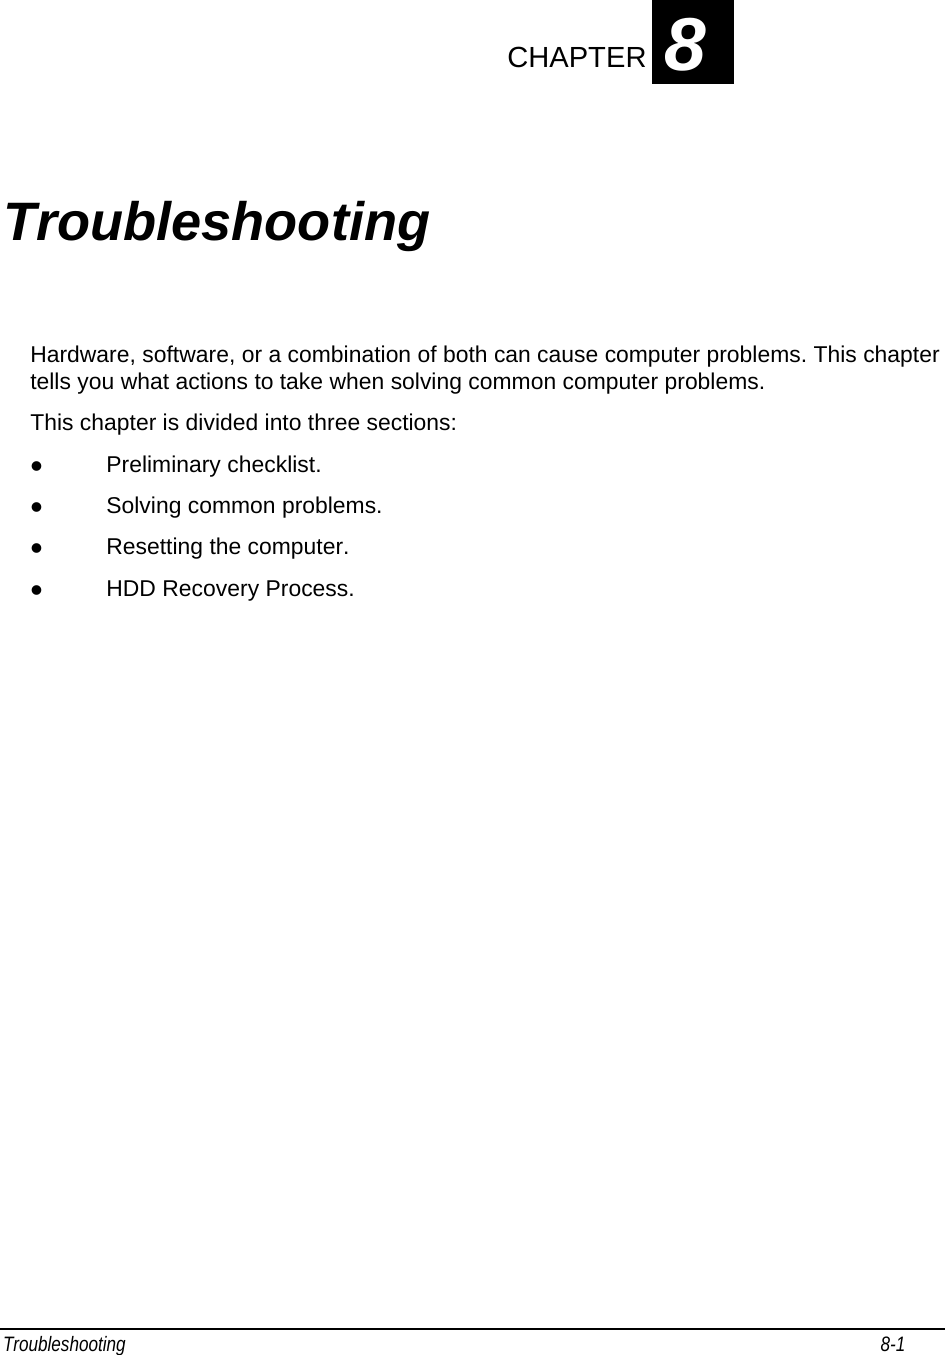 Troubleshooting                                                                                                                                                               8-1                                       CHAPTER 8 Troubleshooting Hardware, software, or a combination of both can cause computer problems. This chapter tells you what actions to take when solving common computer problems.  This chapter is divided into three sections: z Preliminary checklist. z Solving common problems. z Resetting the computer. z HDD Recovery Process.  